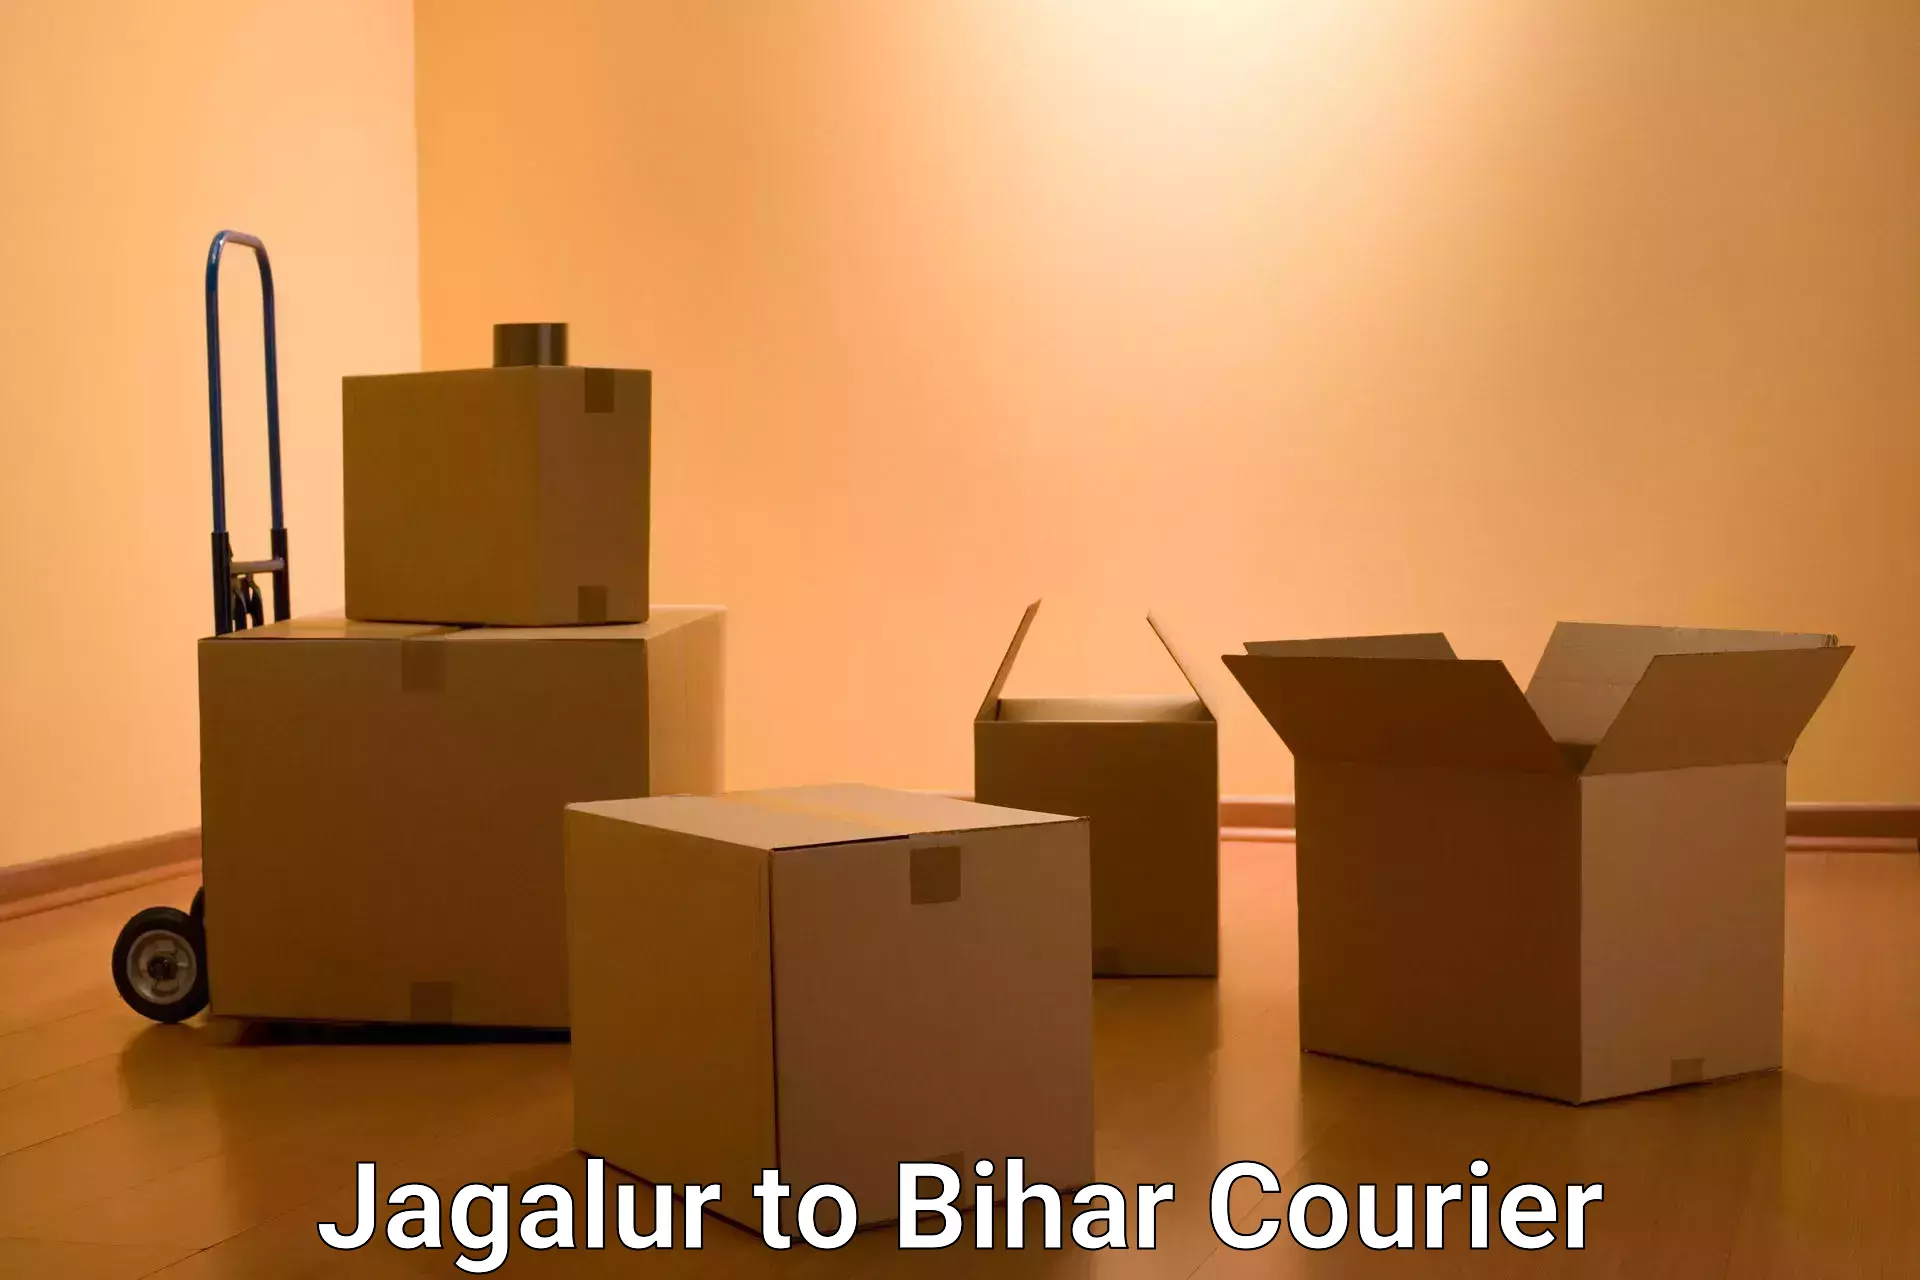 Expedited shipping methods Jagalur to Danapur